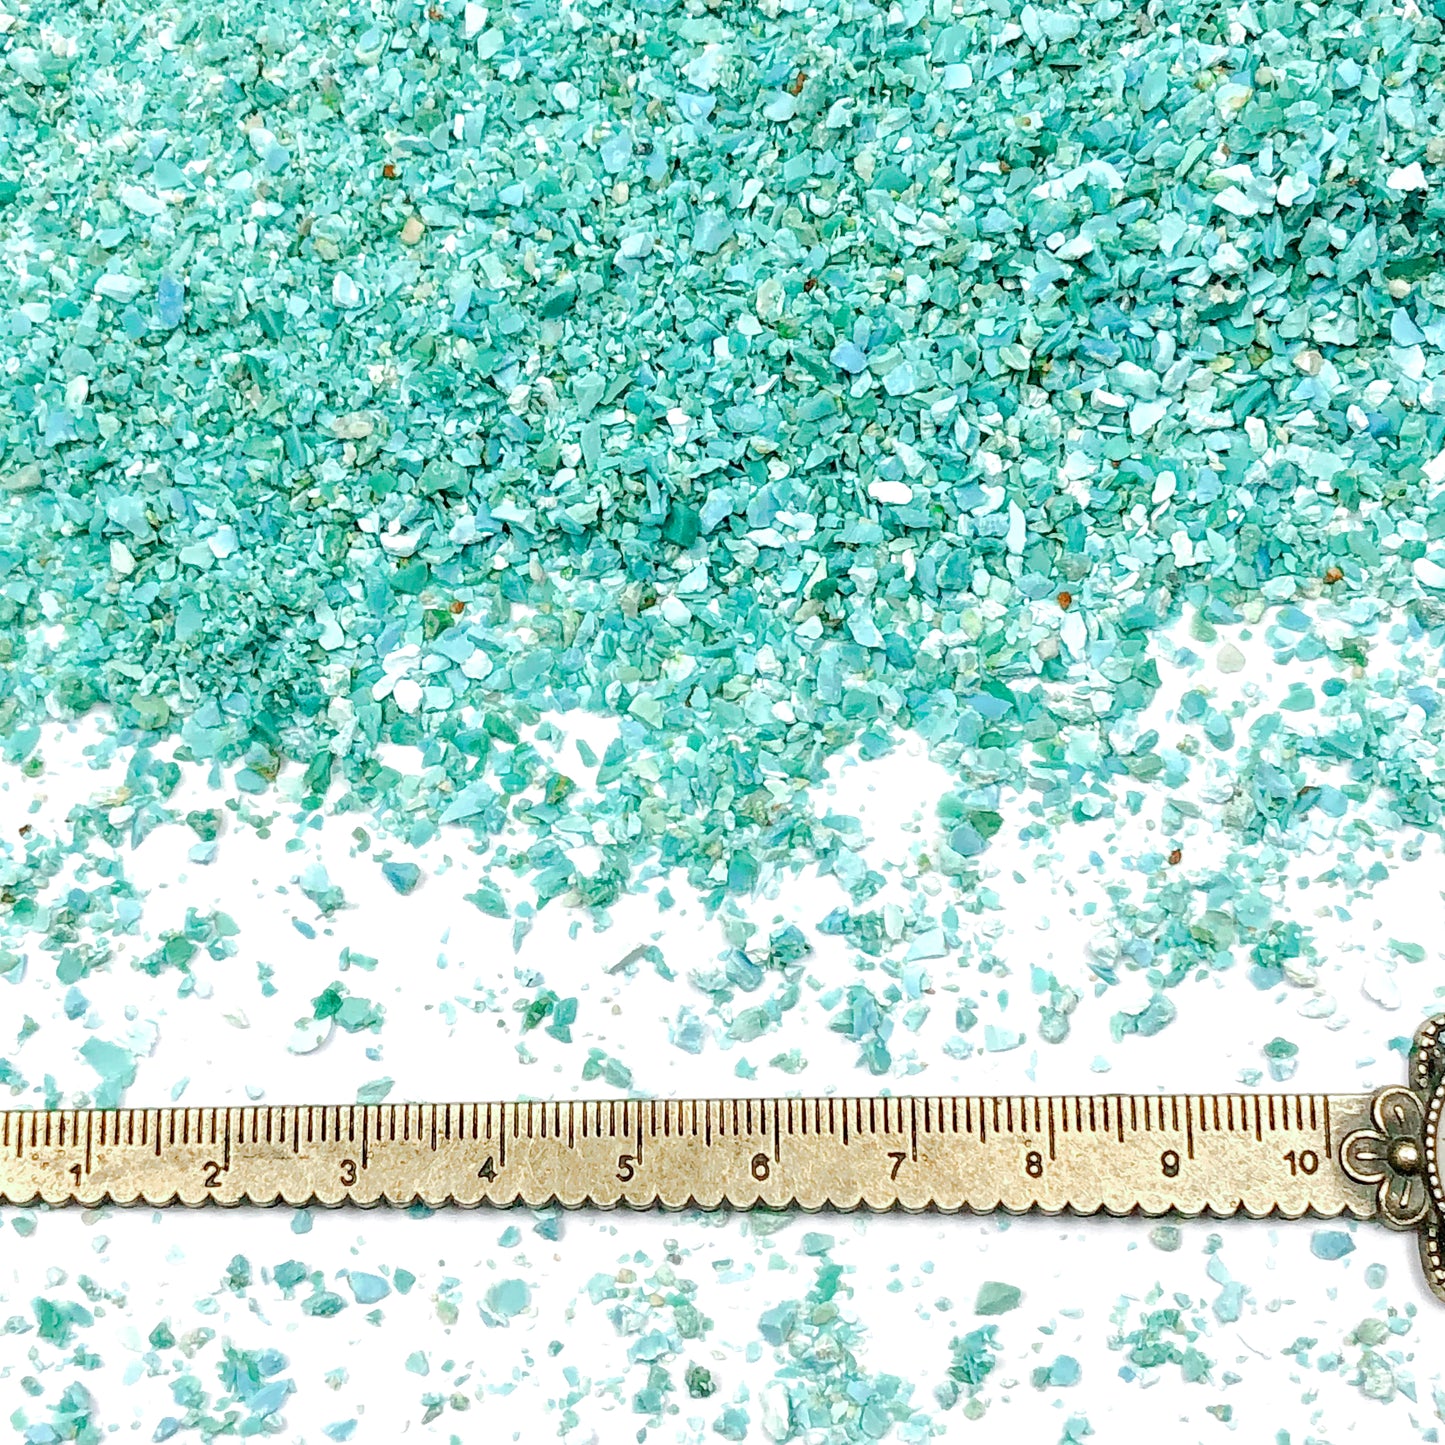 Crushed Blue-Green Fox Turquoise from Nevada, Medium Crush, Sand Size, 2mm - 0.25mm